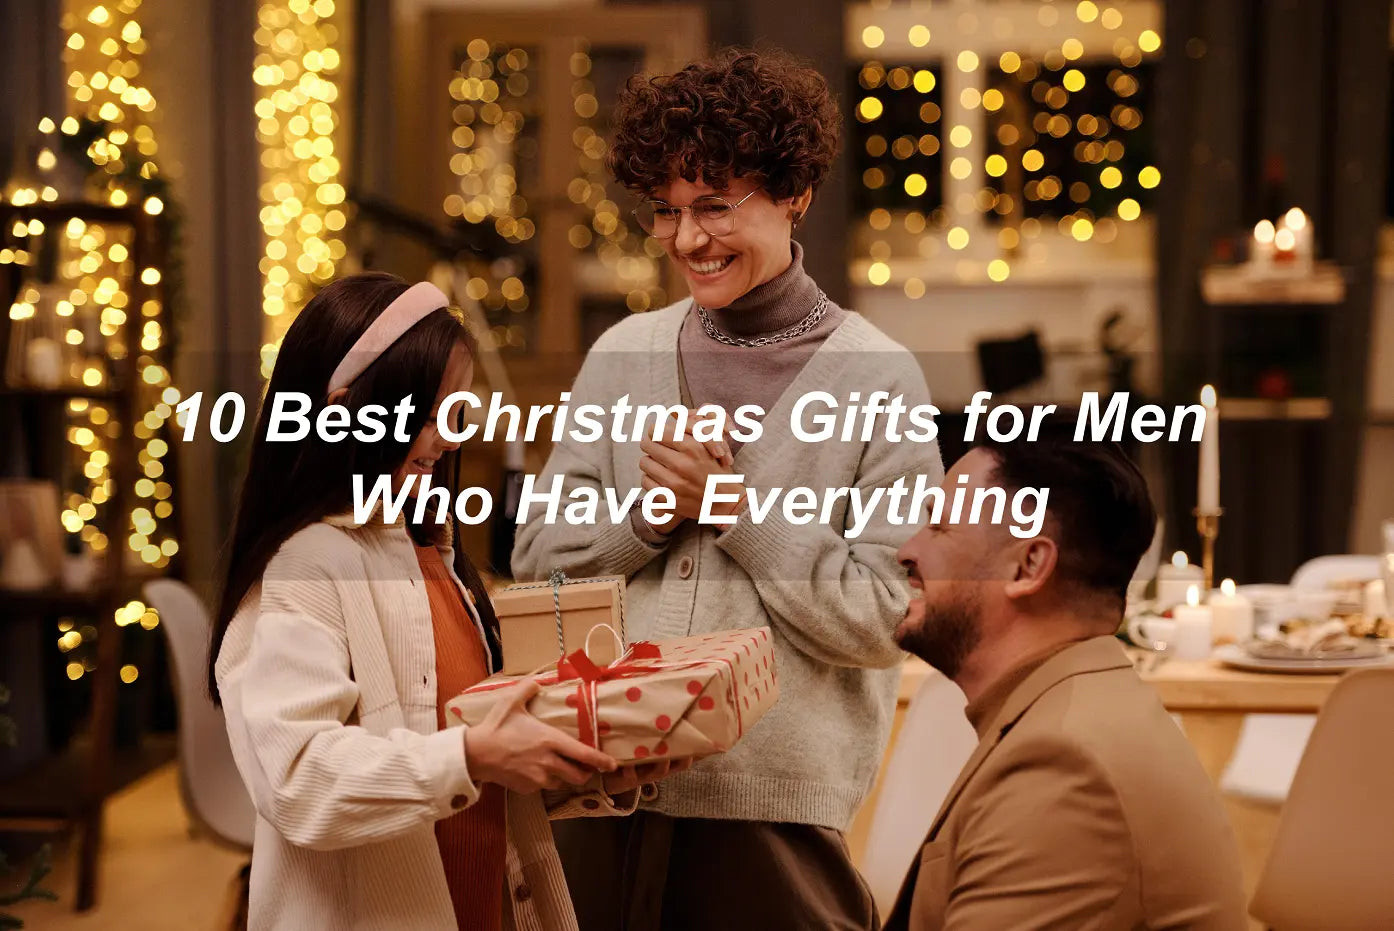 10 Best Christmas Gifts for Men Who Have Everything